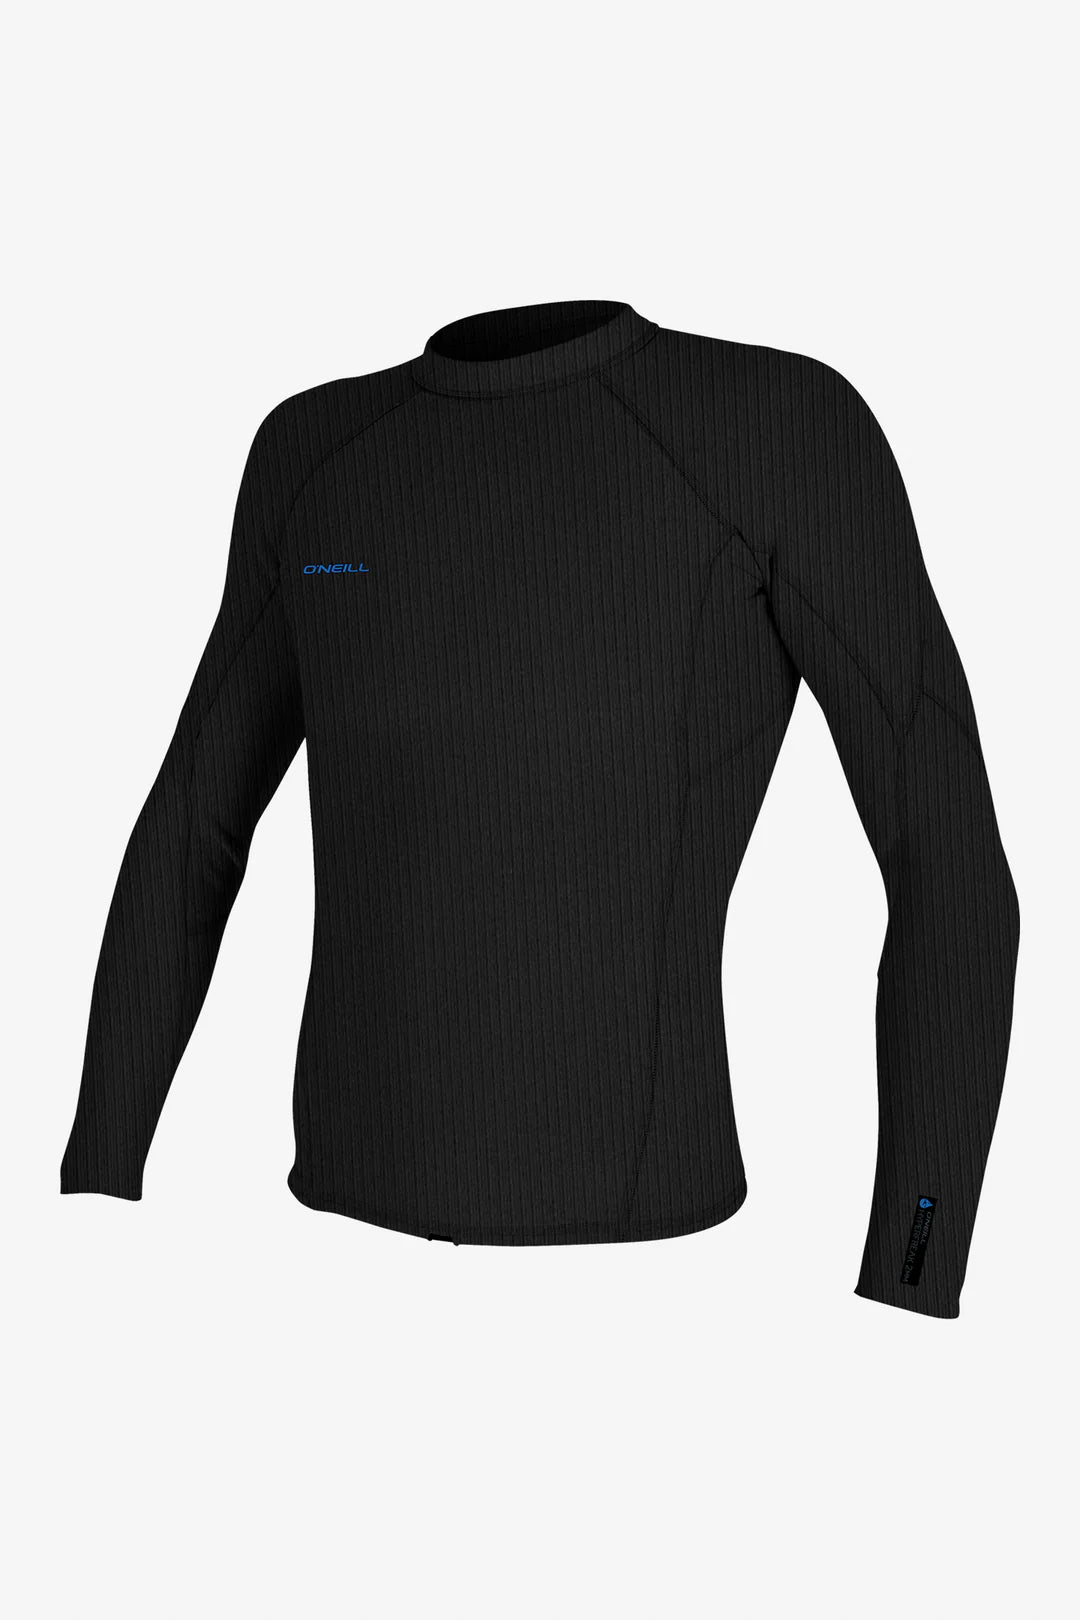 O'neill Youth Hyperfreak L/S Neo Top Comp-X BLK